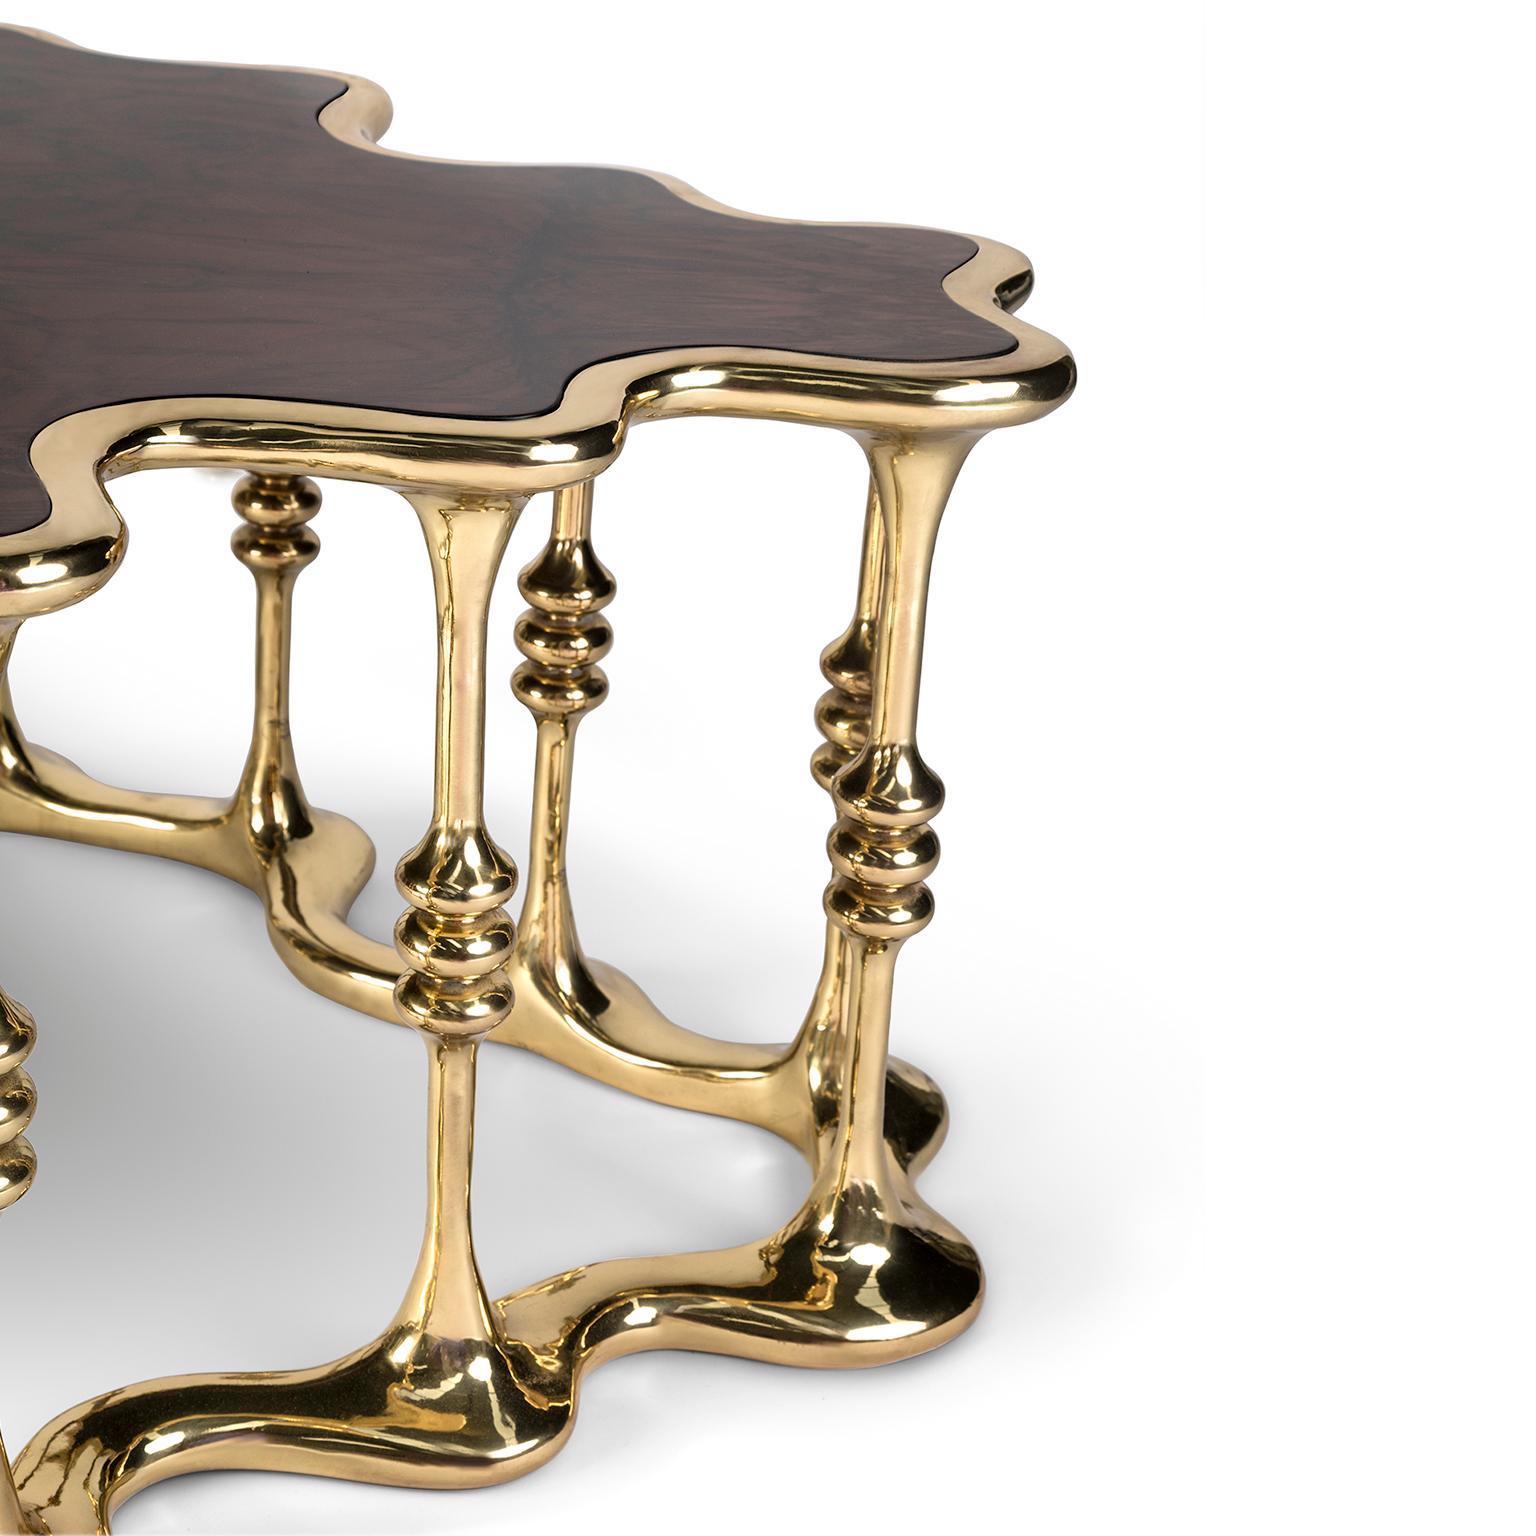 Modern Contemporary Gaudi Center Table, Polished Brass and Walnut Root Veneer Tabletop For Sale